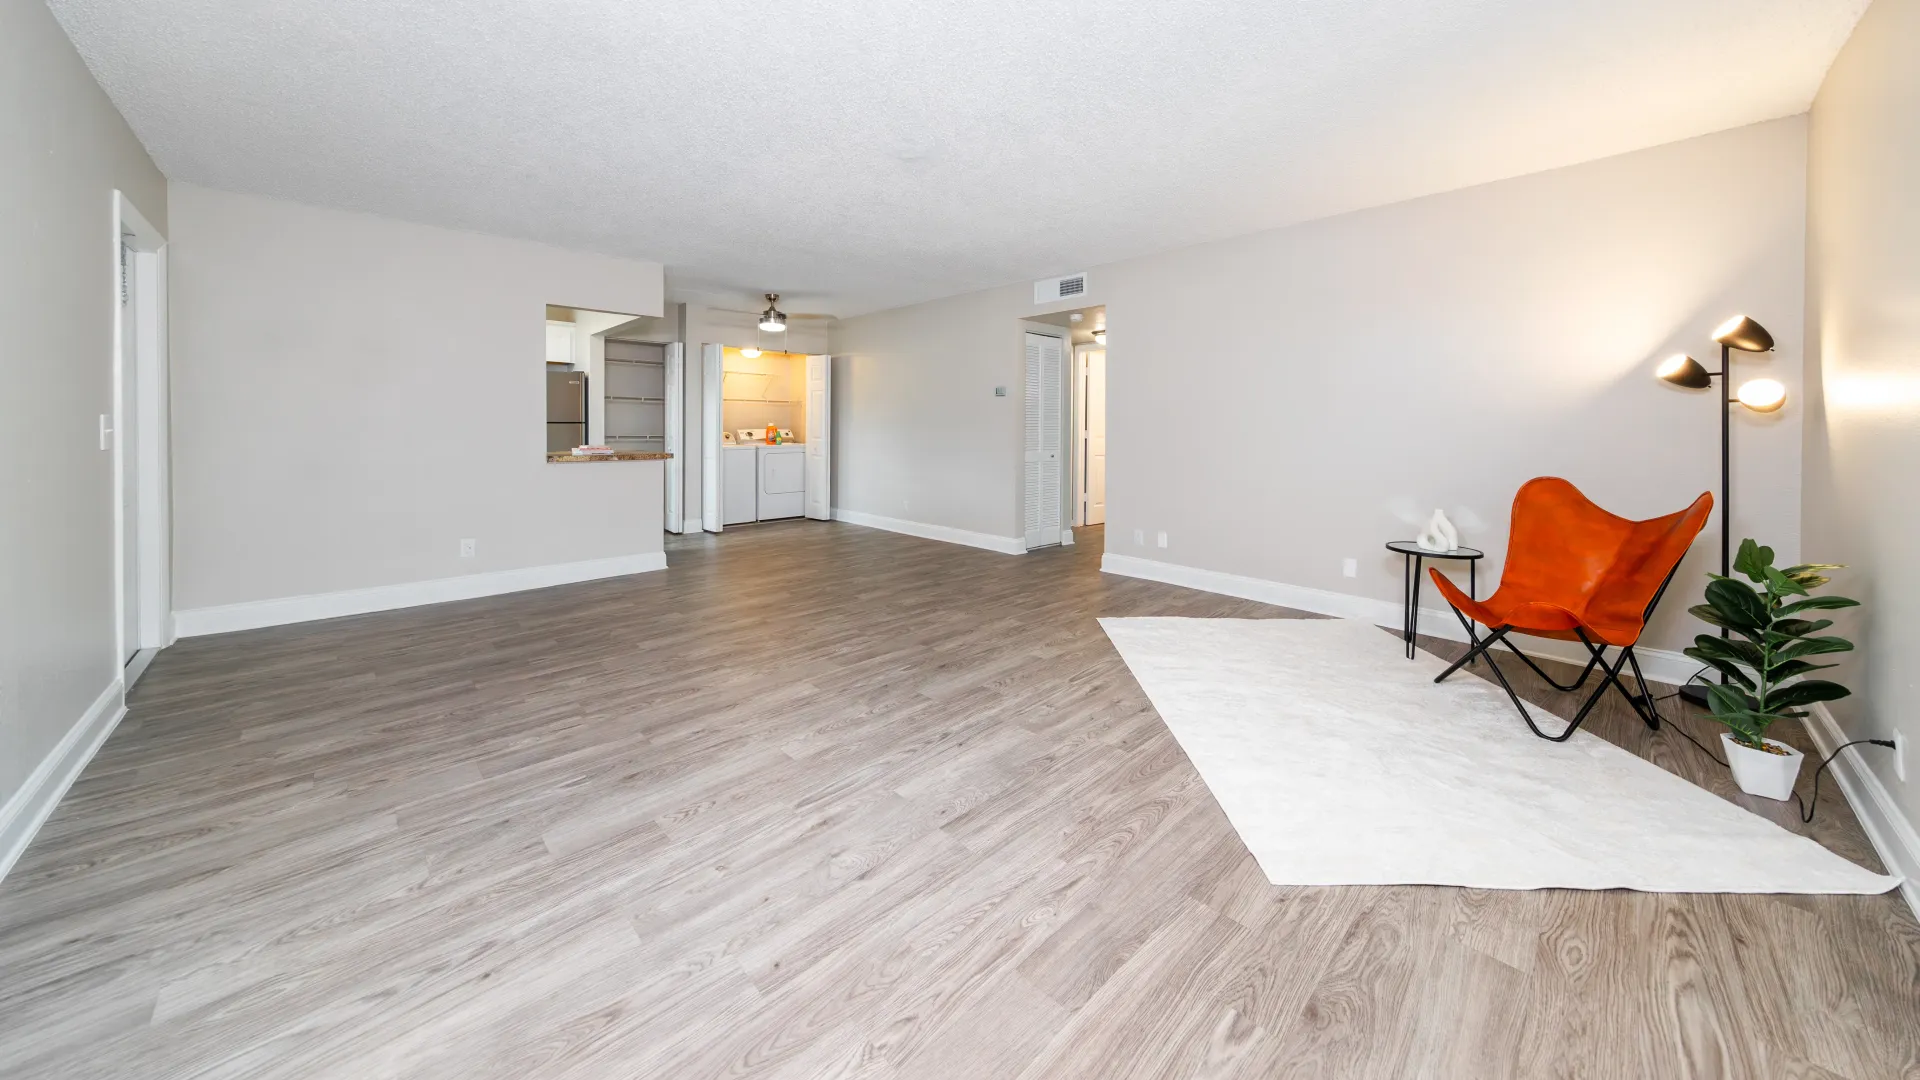 A wide-open living room space showing a clear line of sight into the quaint kitchen, conveniently located laundry appliances, and an added storage pantry—everything you need to live comfortably.